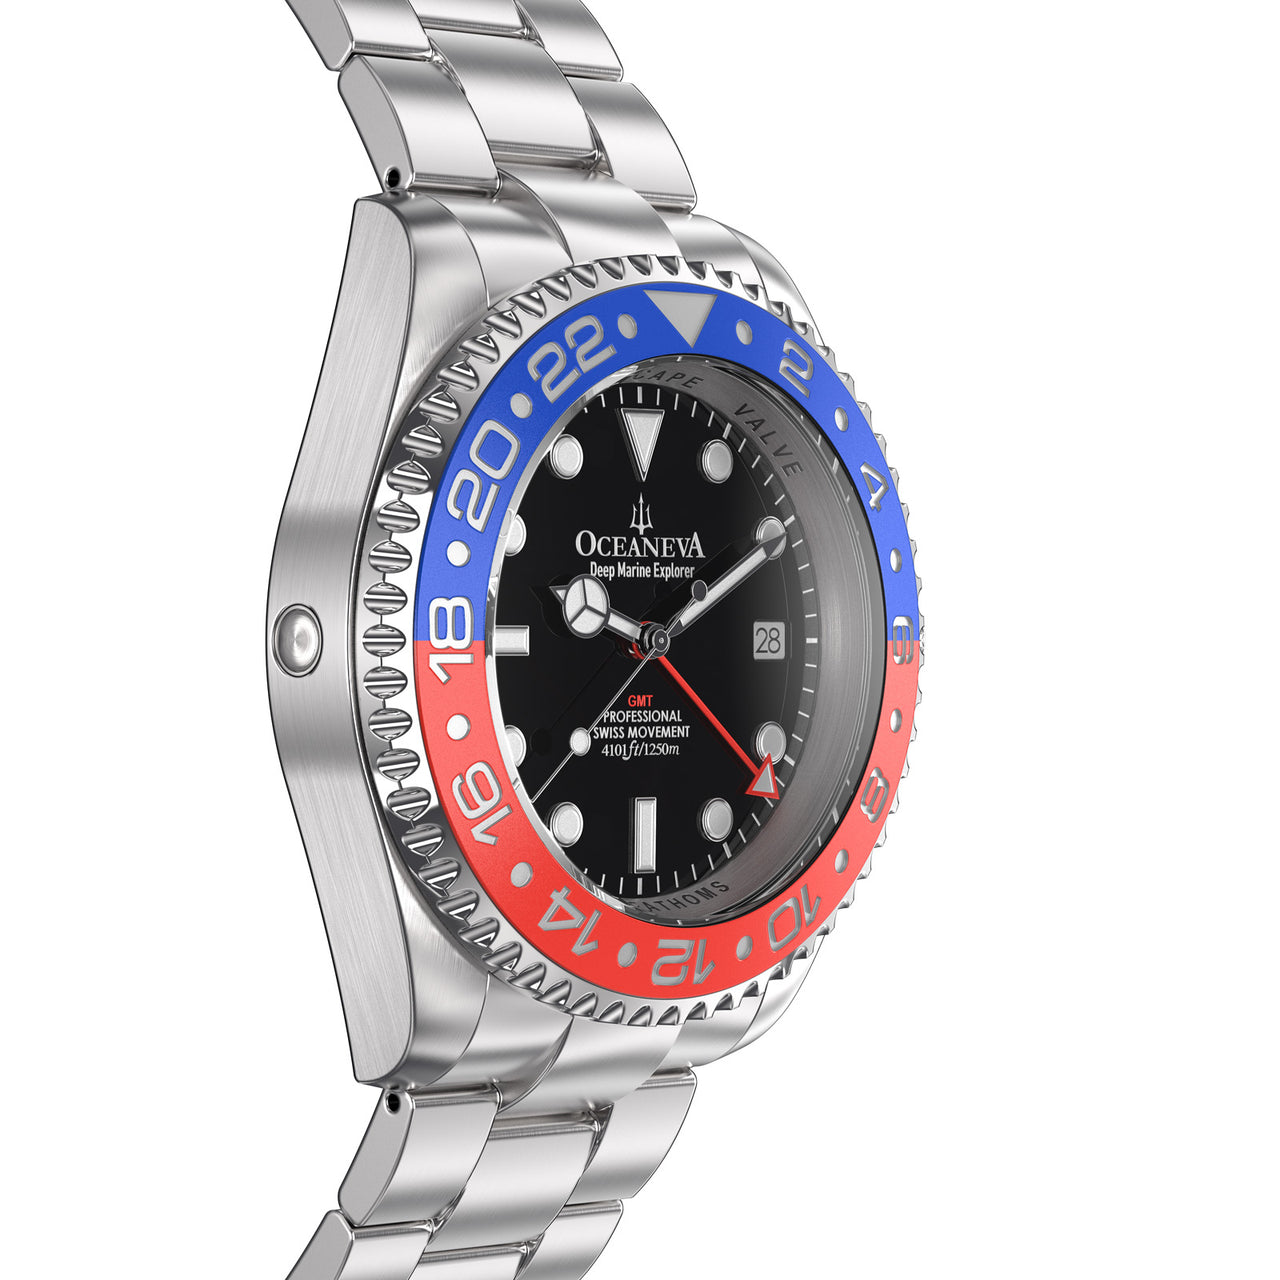 Oceaneva 1250M GMT Dive Watch Blue And Red Side Helium Escape Valve View